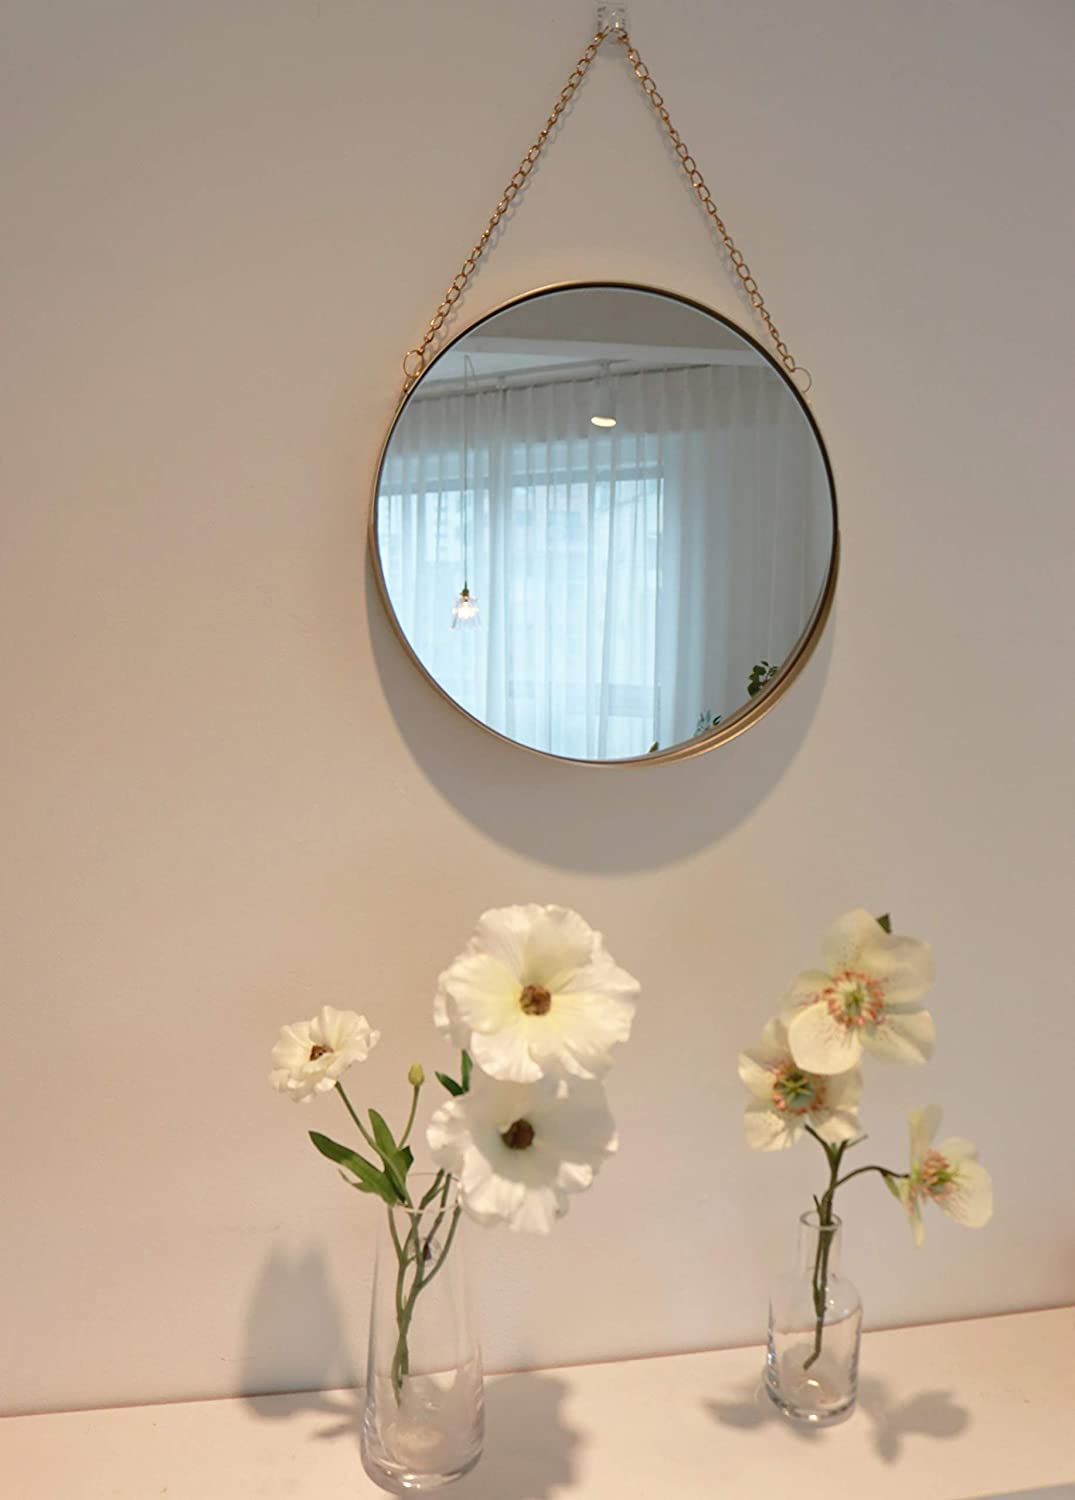 Decorative Hanging Wall Mirror – Small Vintage Mirror For Wall – 10 Regarding Booth Reclaimed Wall Mirrors Accent (View 7 of 15)